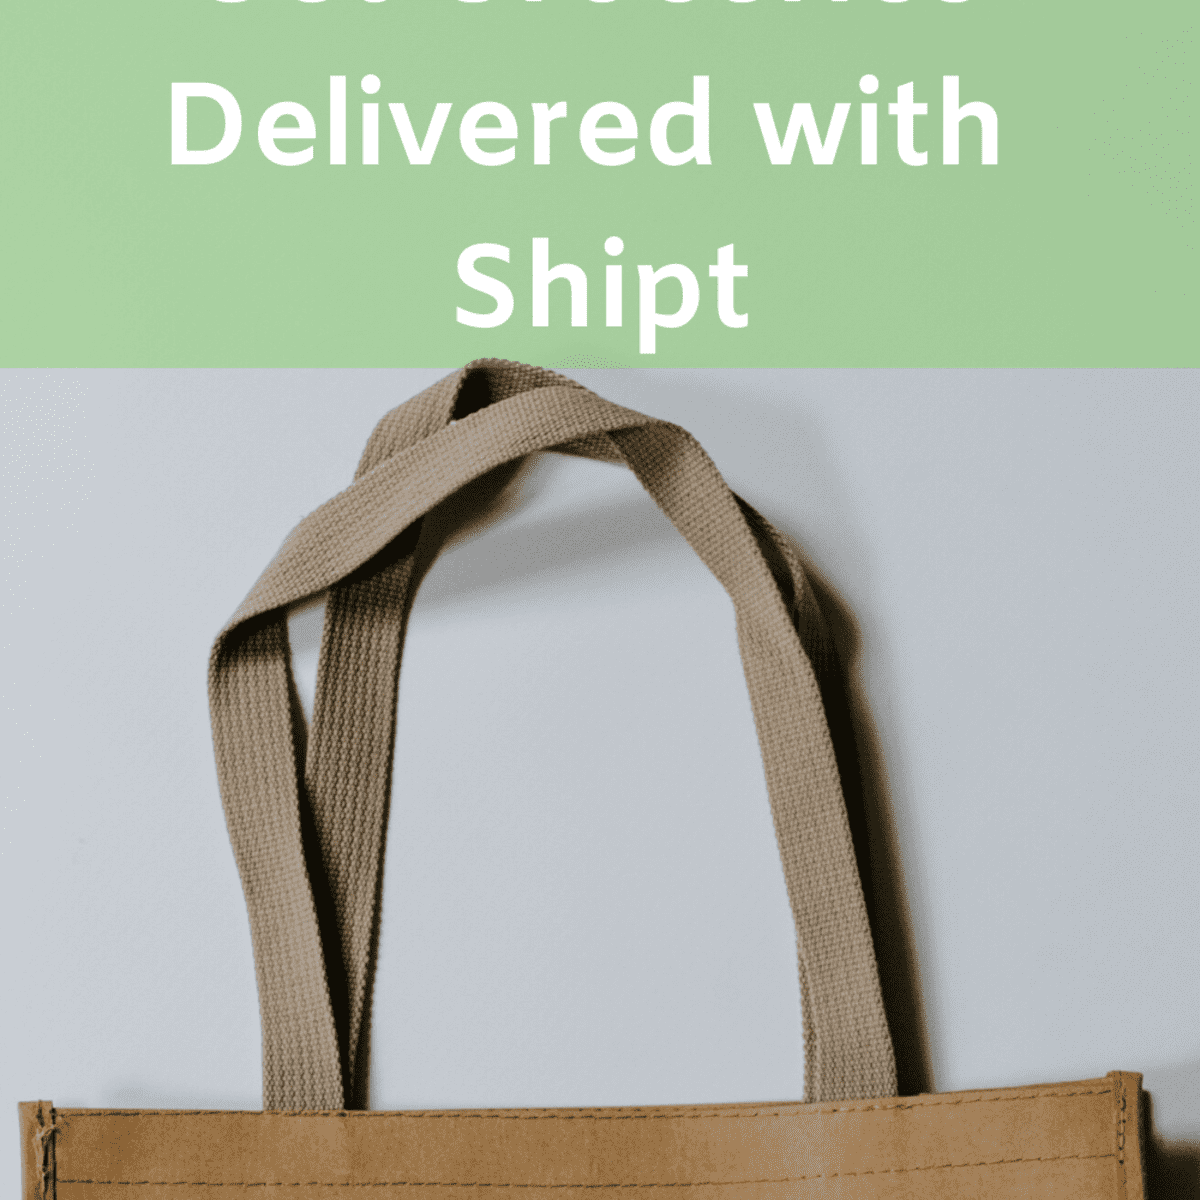 Get Paid to Shop with Shipt - Become a Shipt Shopper